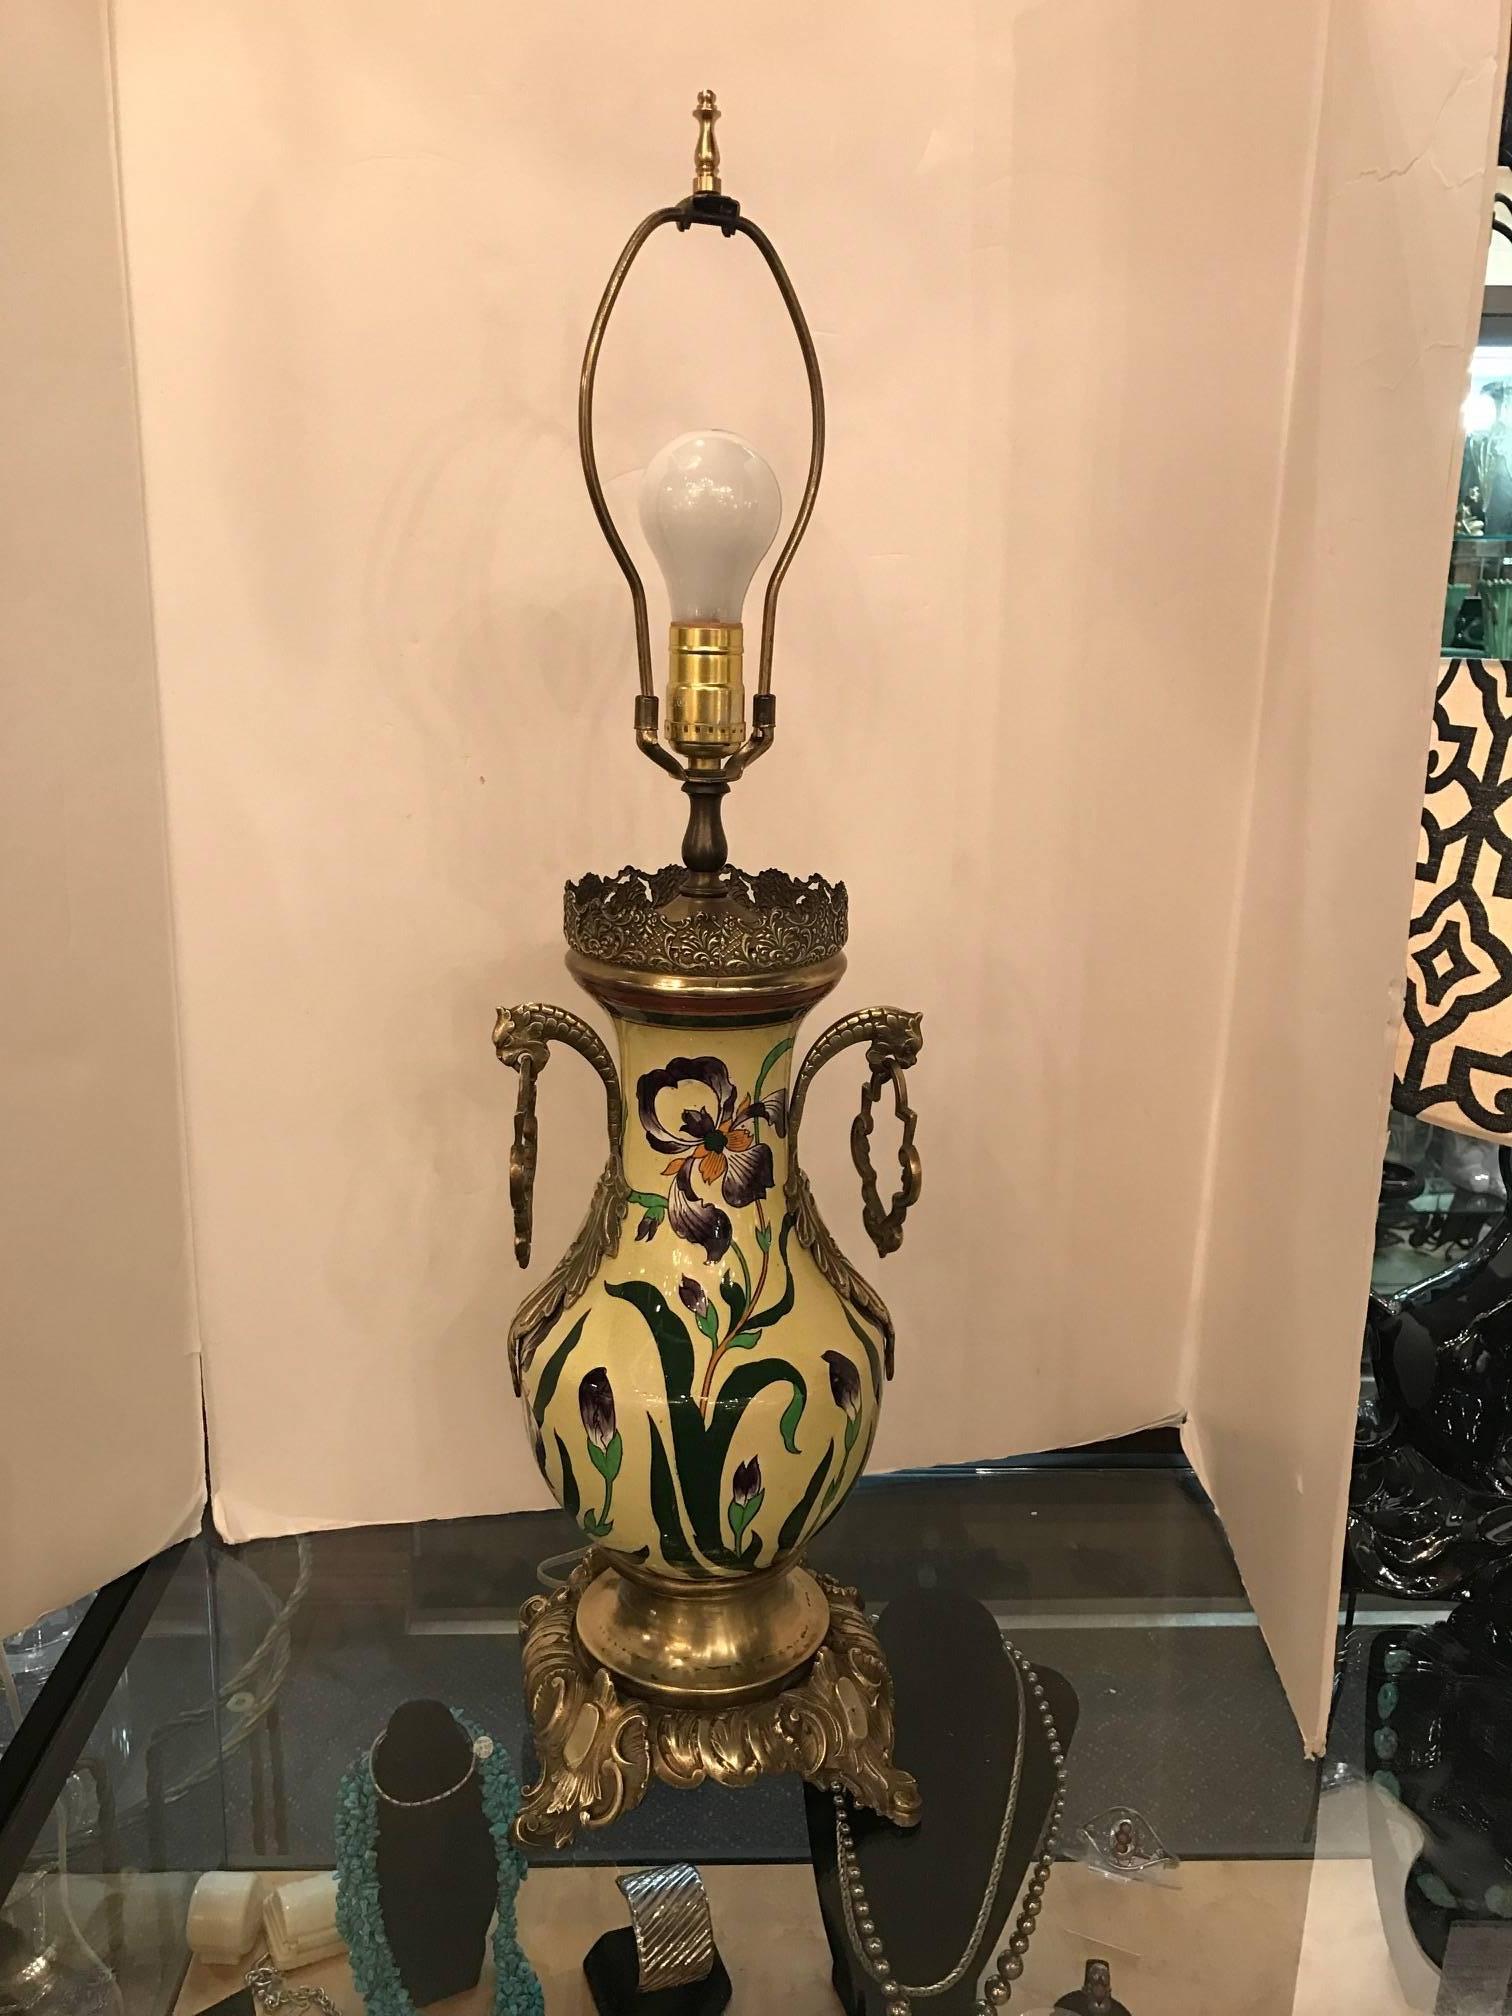 Vibrant hand-painted 19th century Faience and bronze urn now electrified. A maze yellow background with hand-painted iris and leaf pattern. The basic shade is for photographic purposes and not included with the lamp. Total height is 29 inches to the